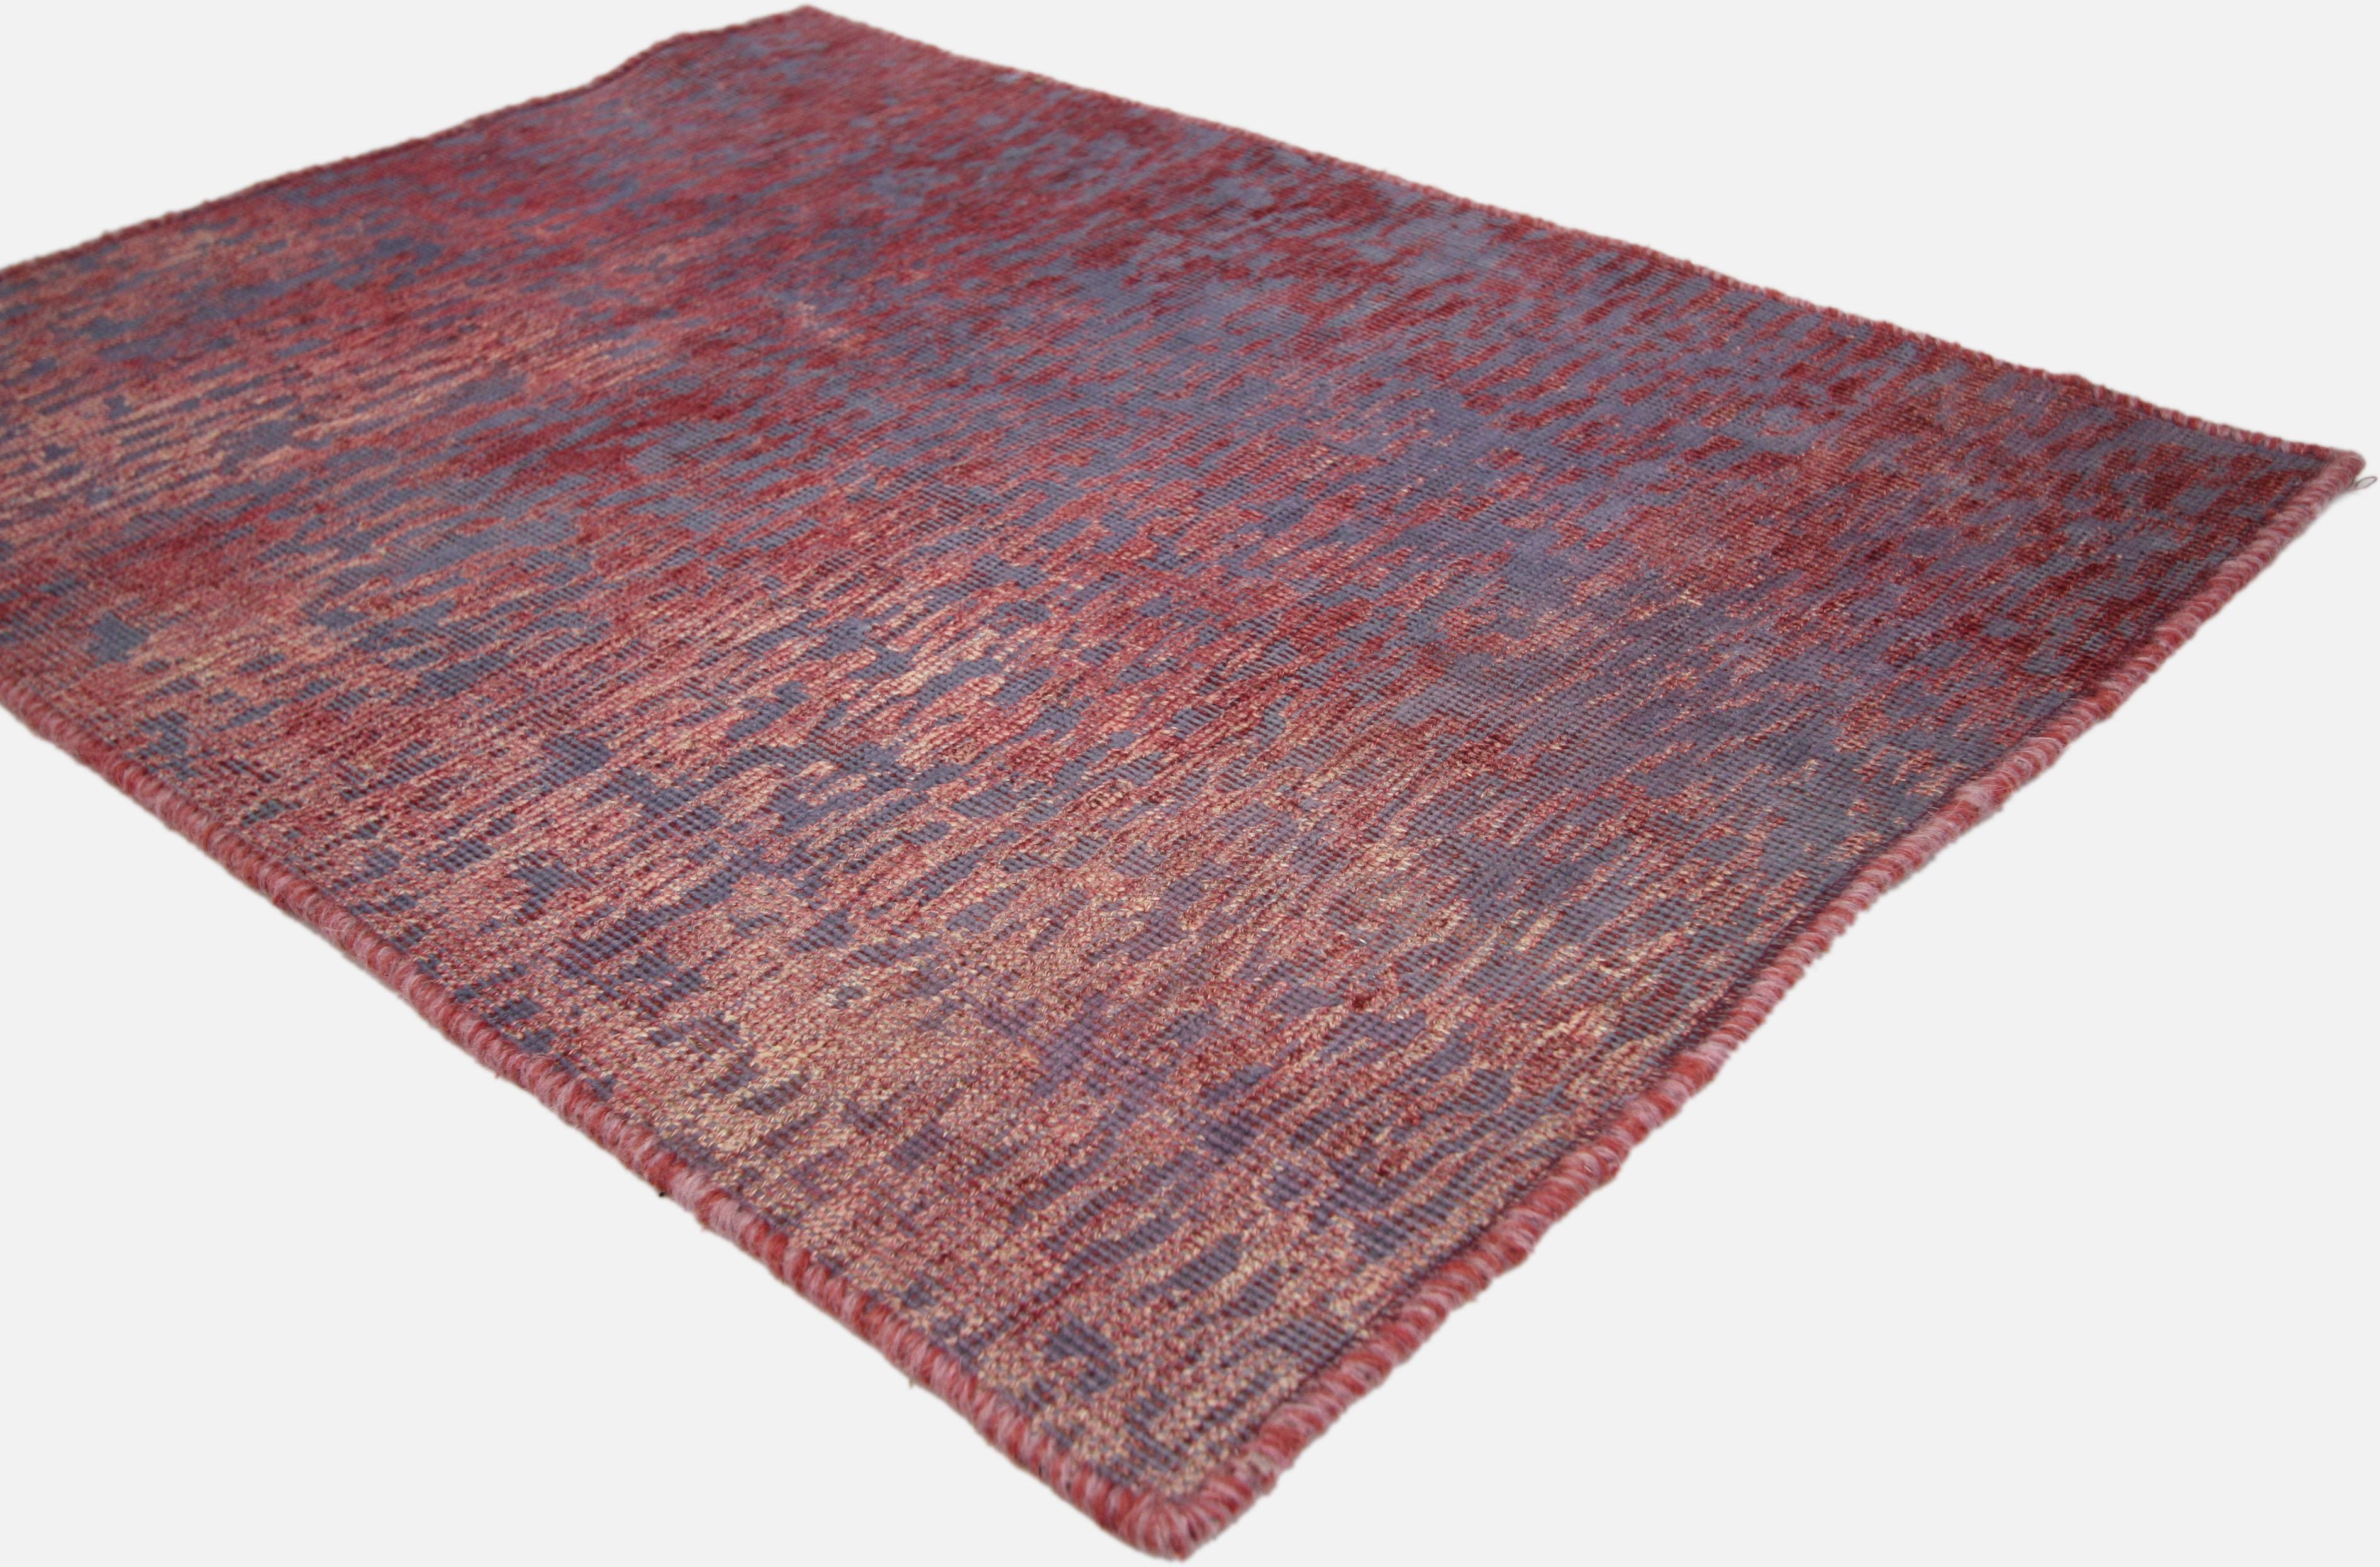 60737 Vintage Turkish Overdyed Rug, 02'02 x 02'11.
​Get ready to spice up your floor game with a dash of style, a pinch of boldness, and a whole lot of wit, courtesy of this distressed overdyed vintage Turkish overdyed rug. It's not just a rug; it's